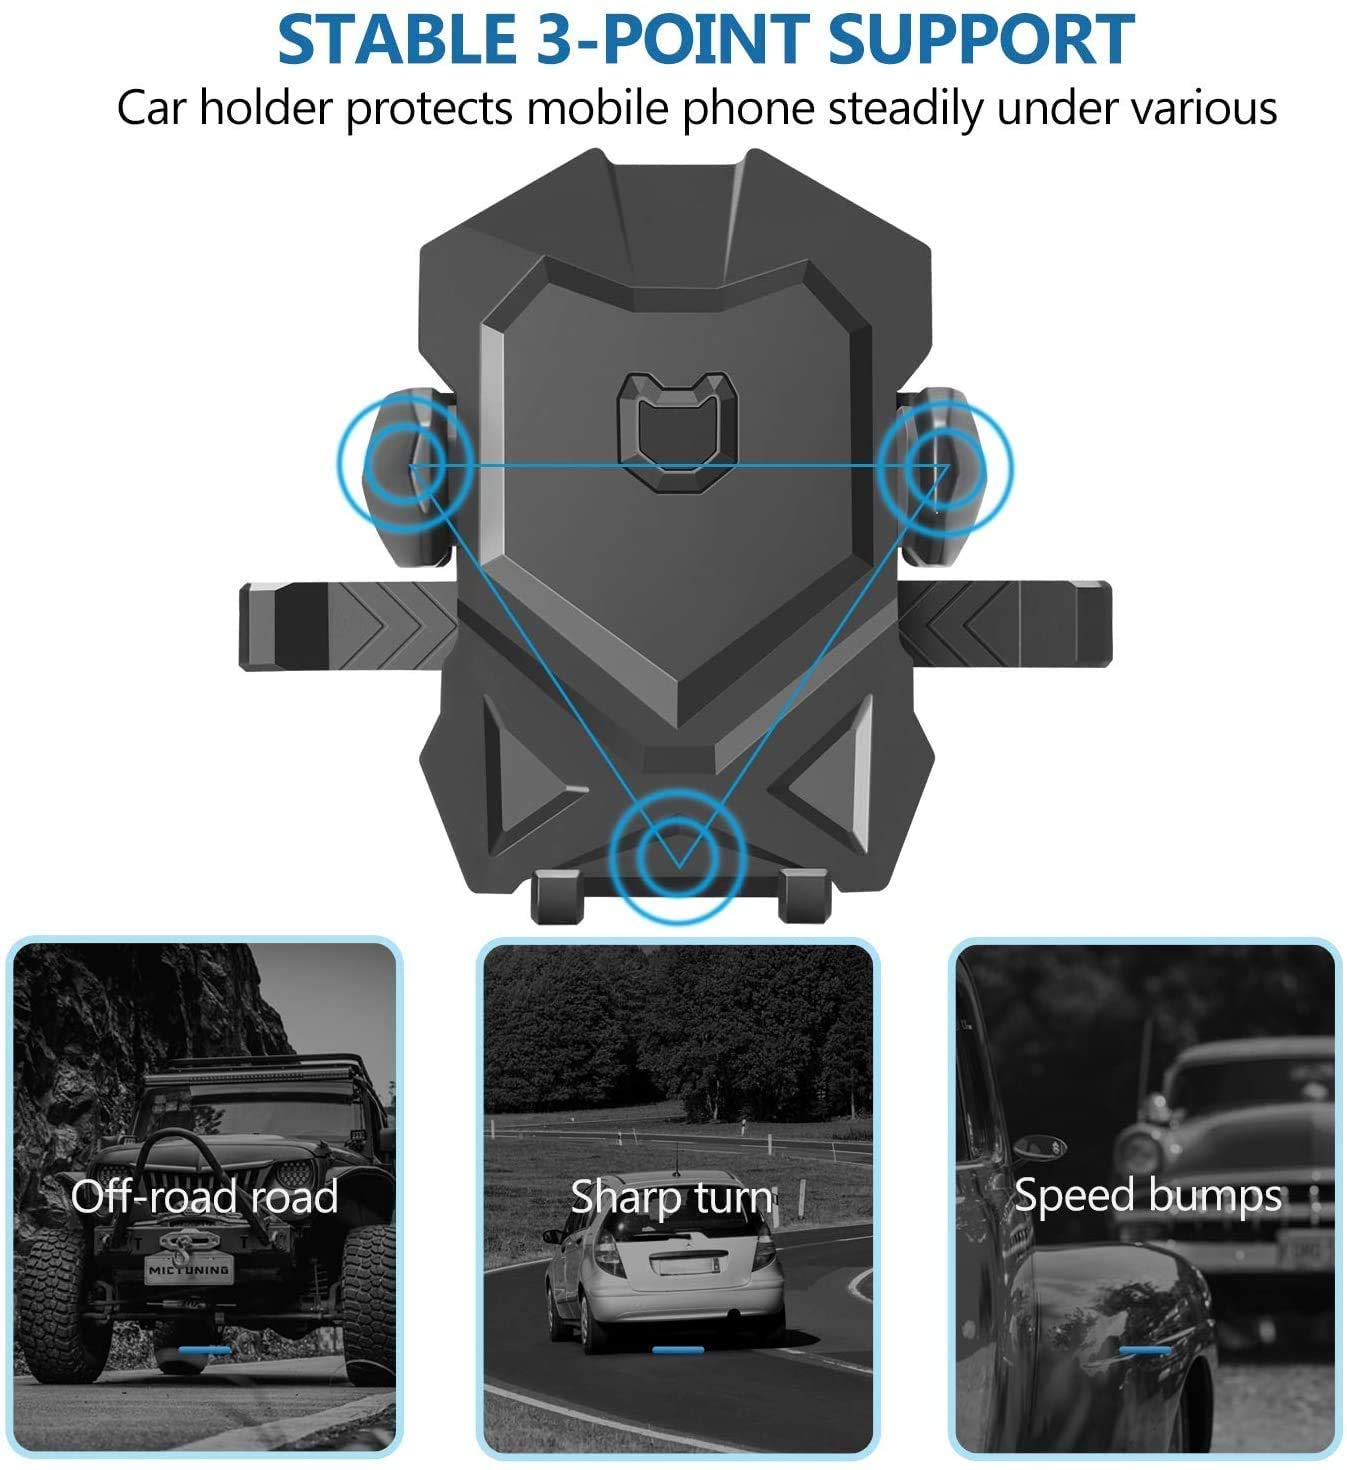 Phone Holder for Car,Universal Long Neck Car Mount Holder Compatible with iPhone Xs XS Max XR X 8 8 Plus 7 7 Plus S10 S9 S8 S7 S6 LG and More